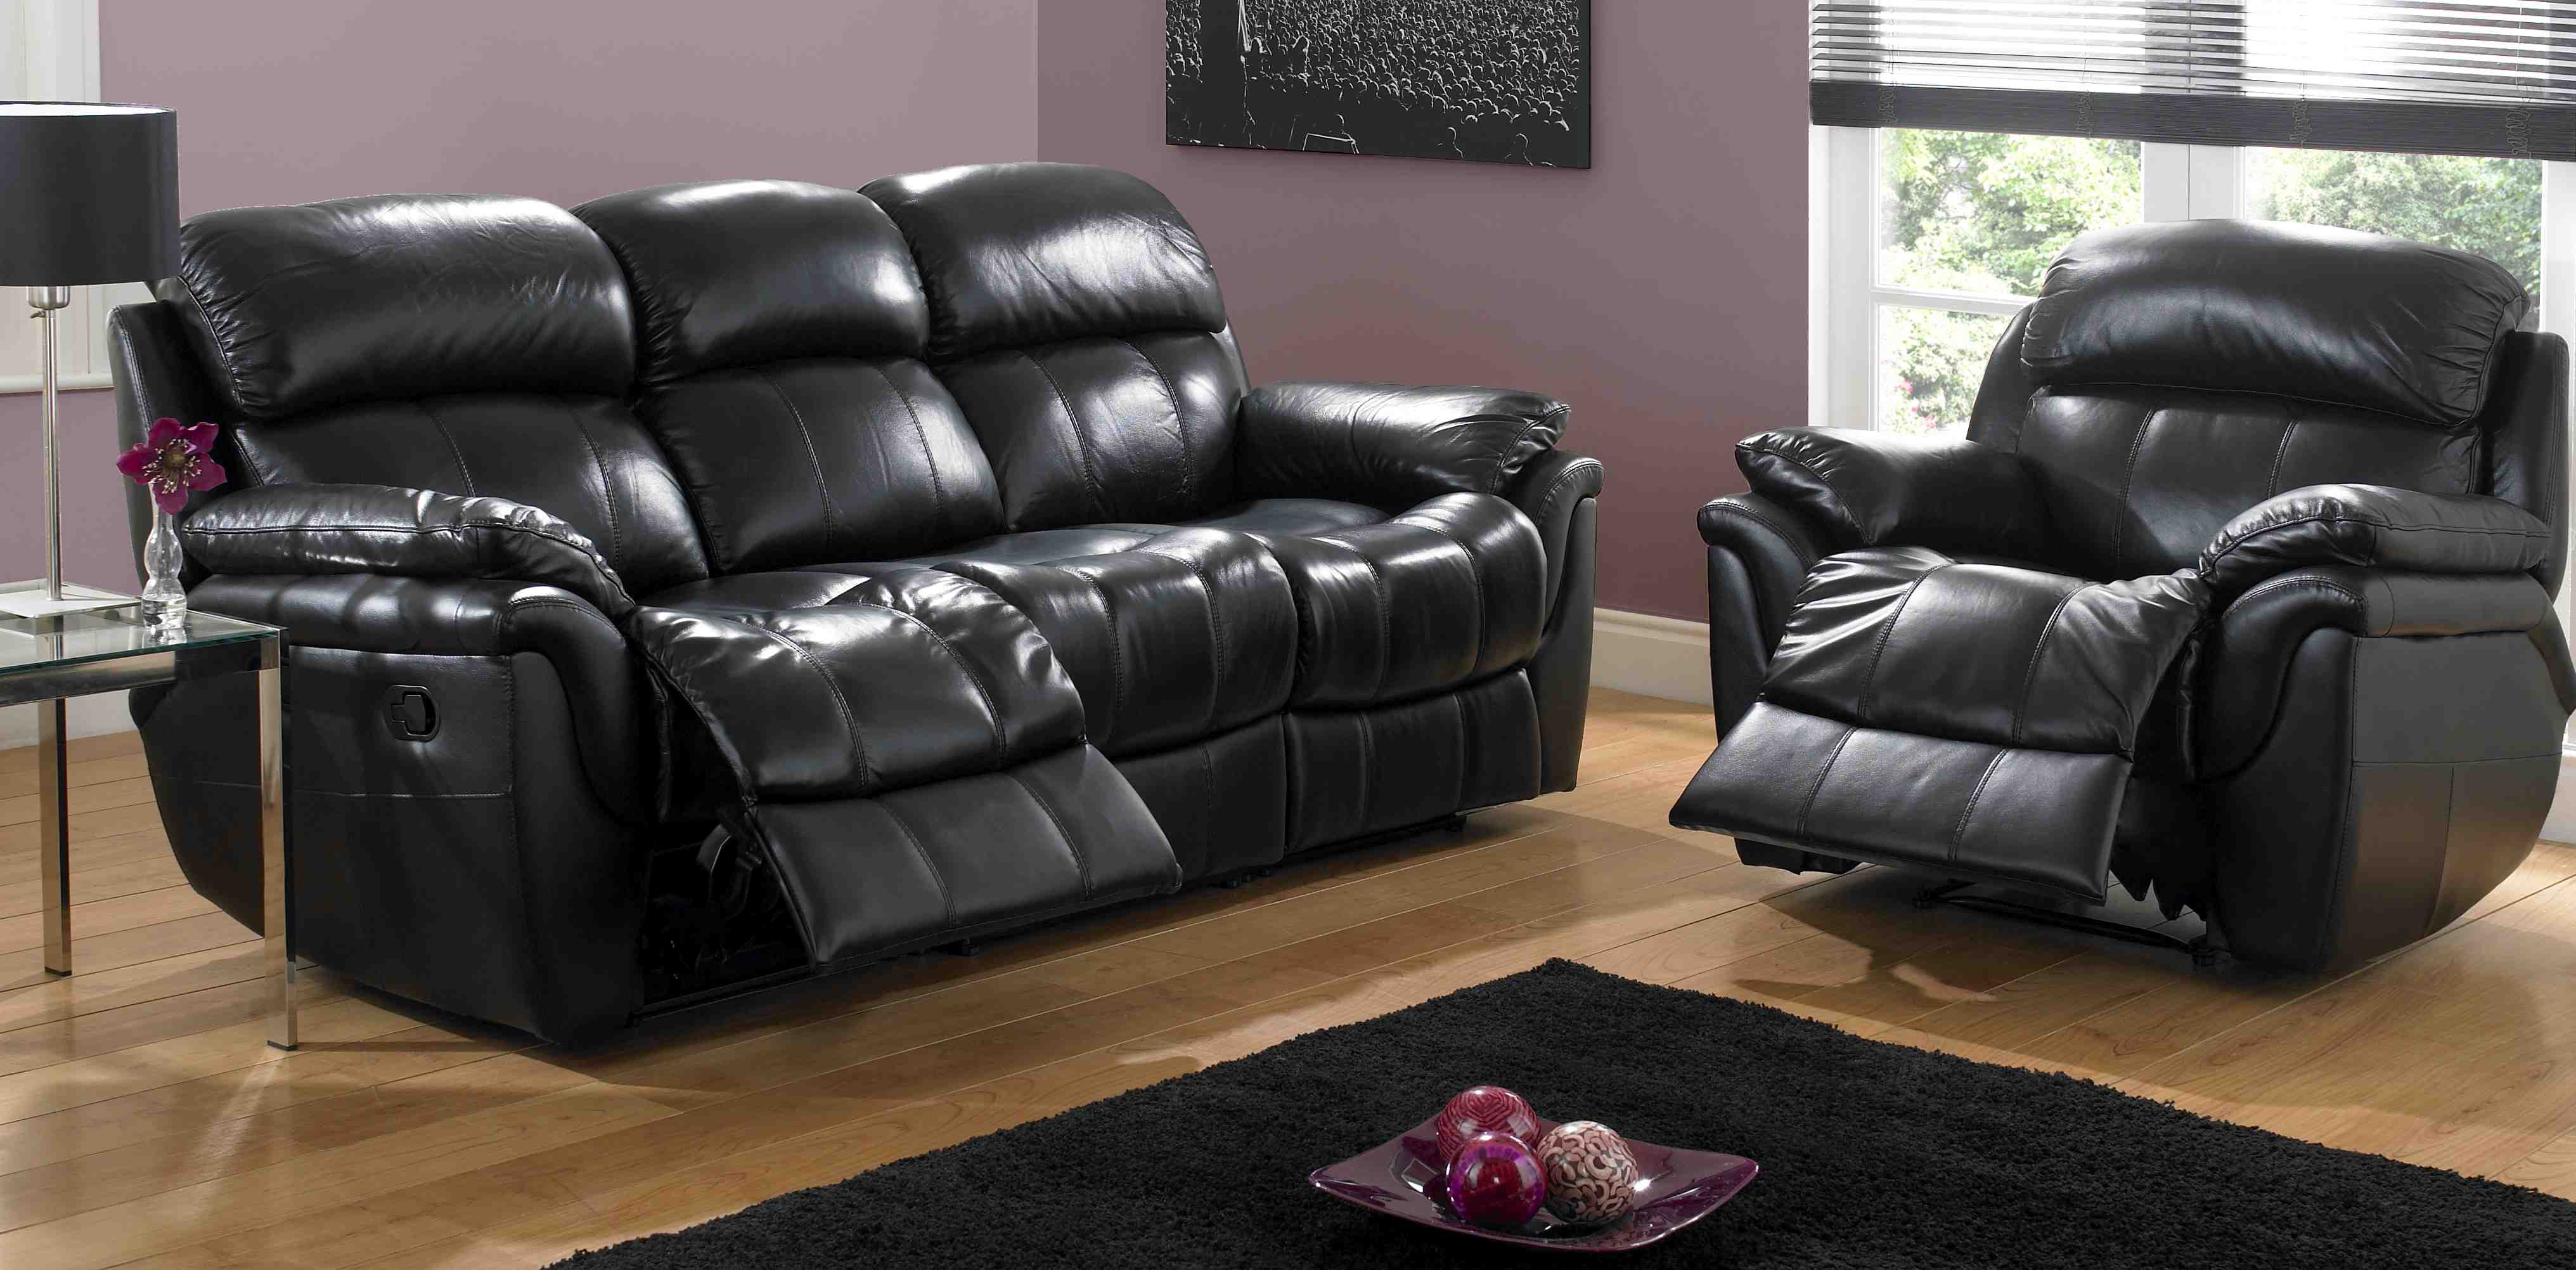 Leather Recliner Sectional Sofa | Leather Sofas with Recliners | Leather  Reclining Sofa